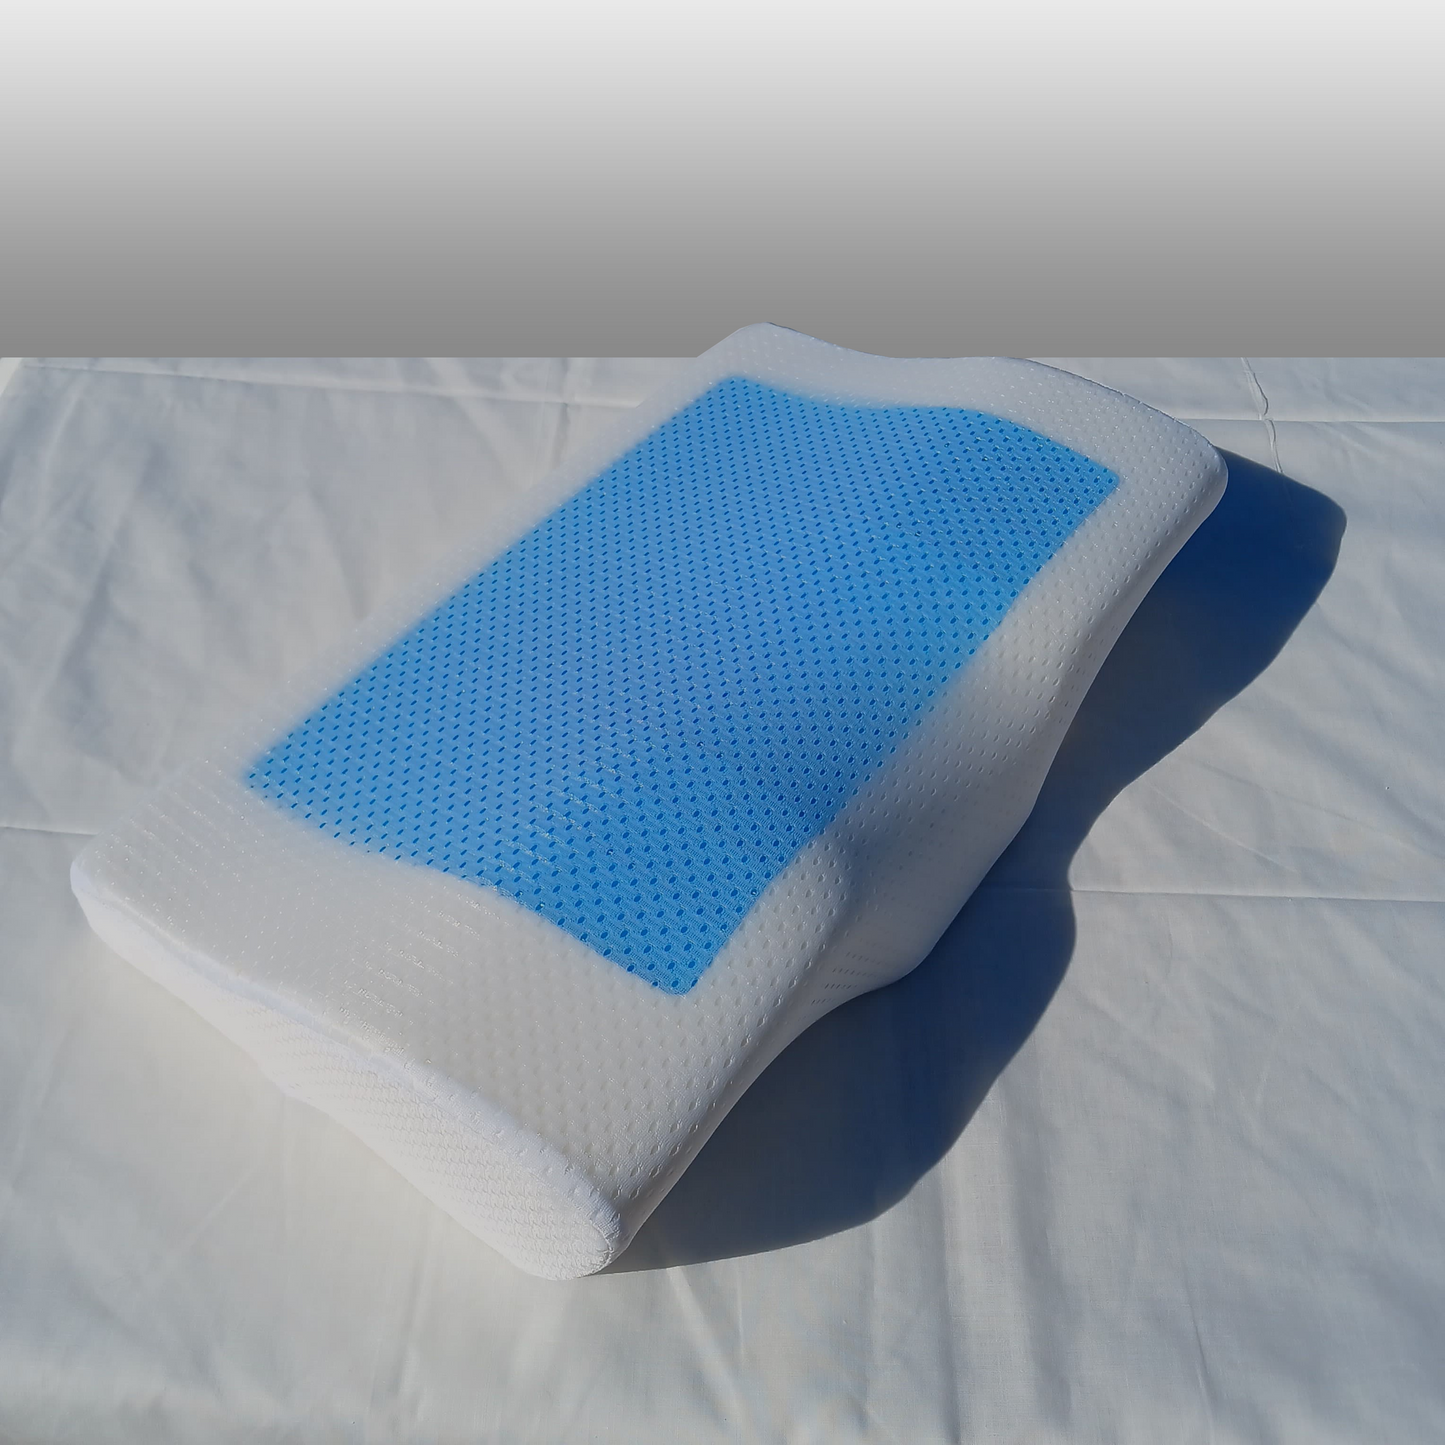 The Cool Cloud | Gel-Infused Medical Pillow